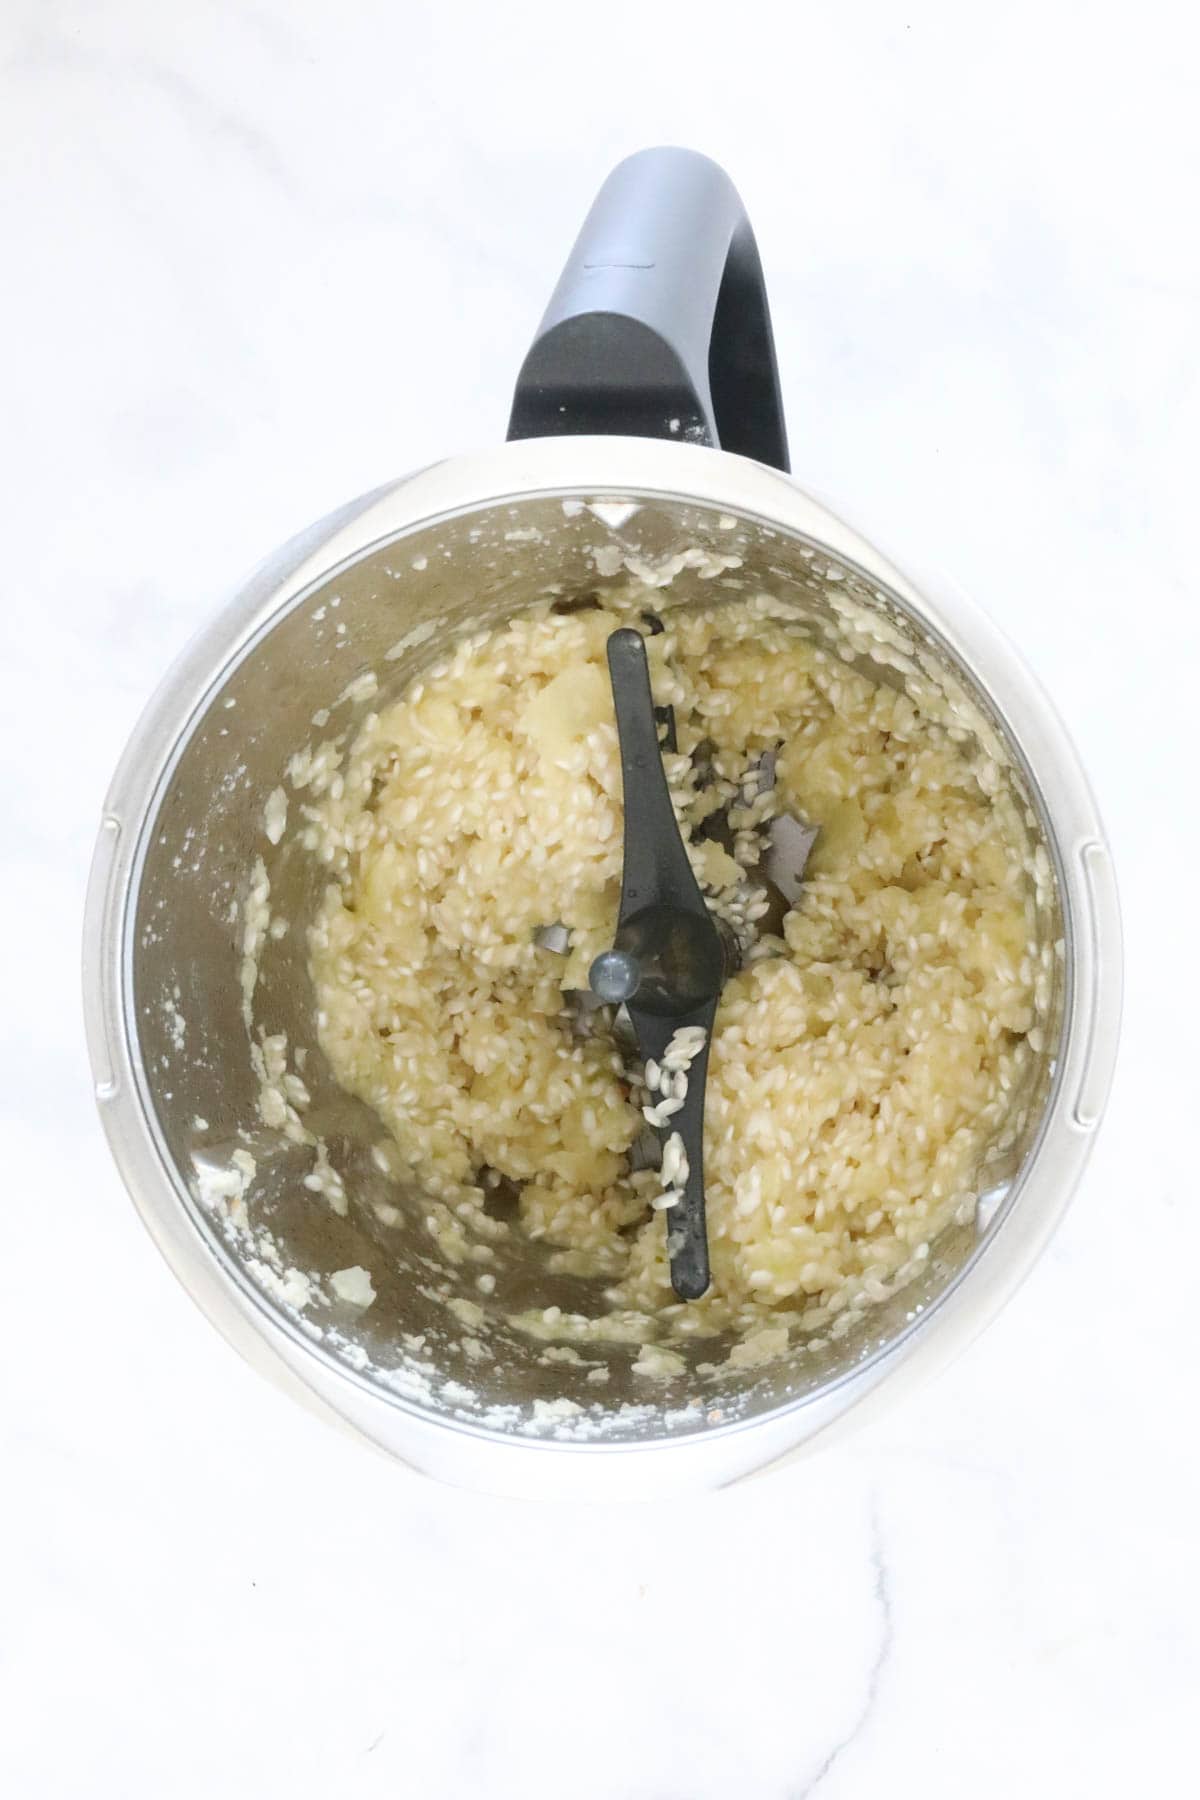 Rice in a Thermomix.